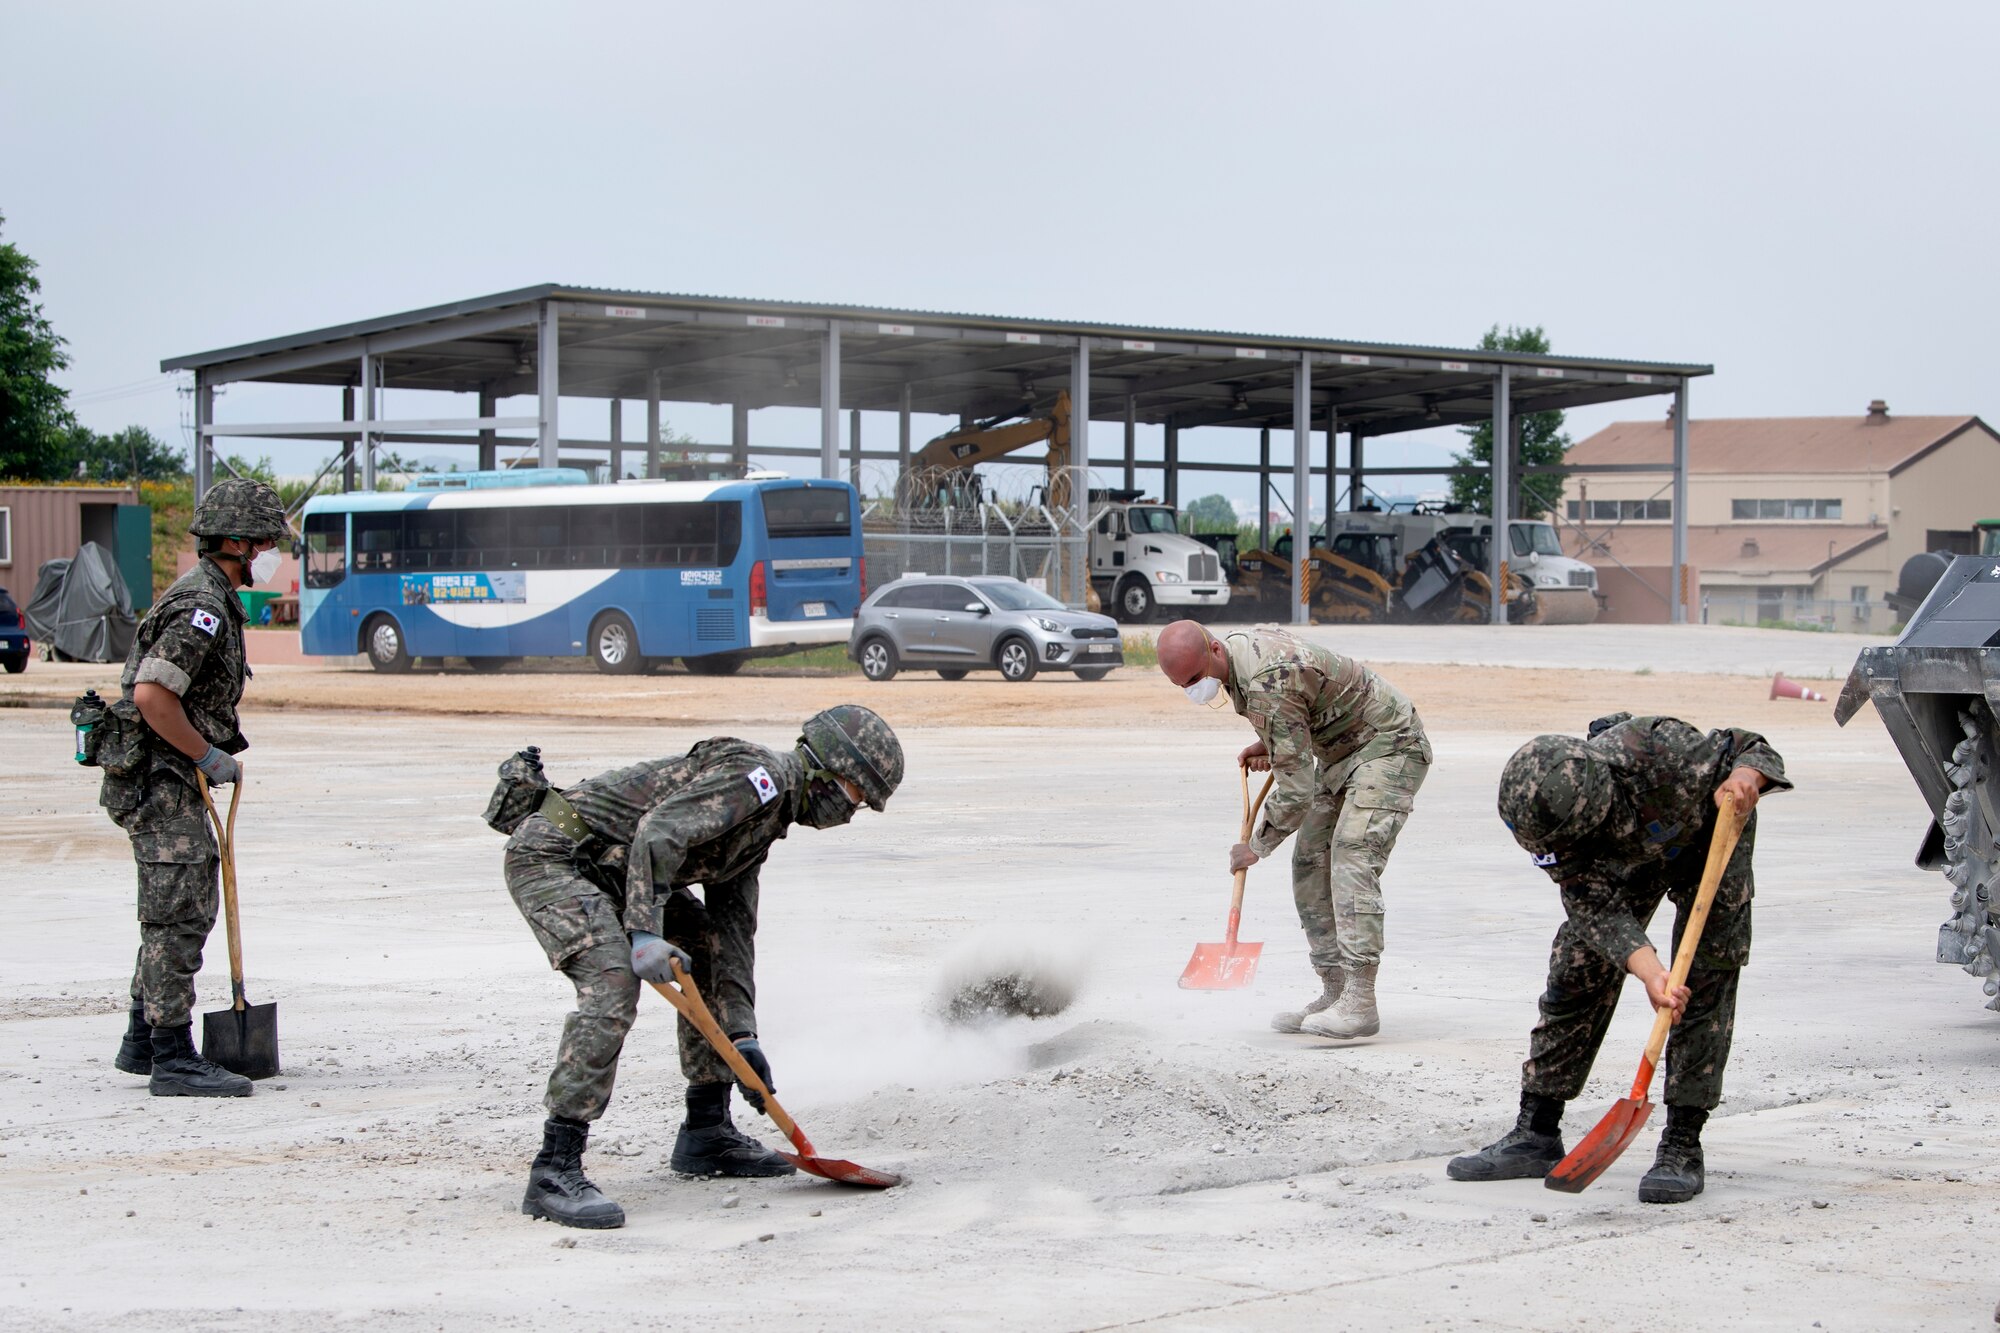 Senior Airman Ernesto Silio Cabrera, 35th Civil Engineer Squadron, water and fuels system maintenance technician from Misawa Air Base, Japan, and members of the Republic of Korea Air Force (ROKAF), shovel cement debris while conducting a runway repair training as part of a bilateral training scenario at Suwon Air Base, Republic of Korea, July 6, 2022